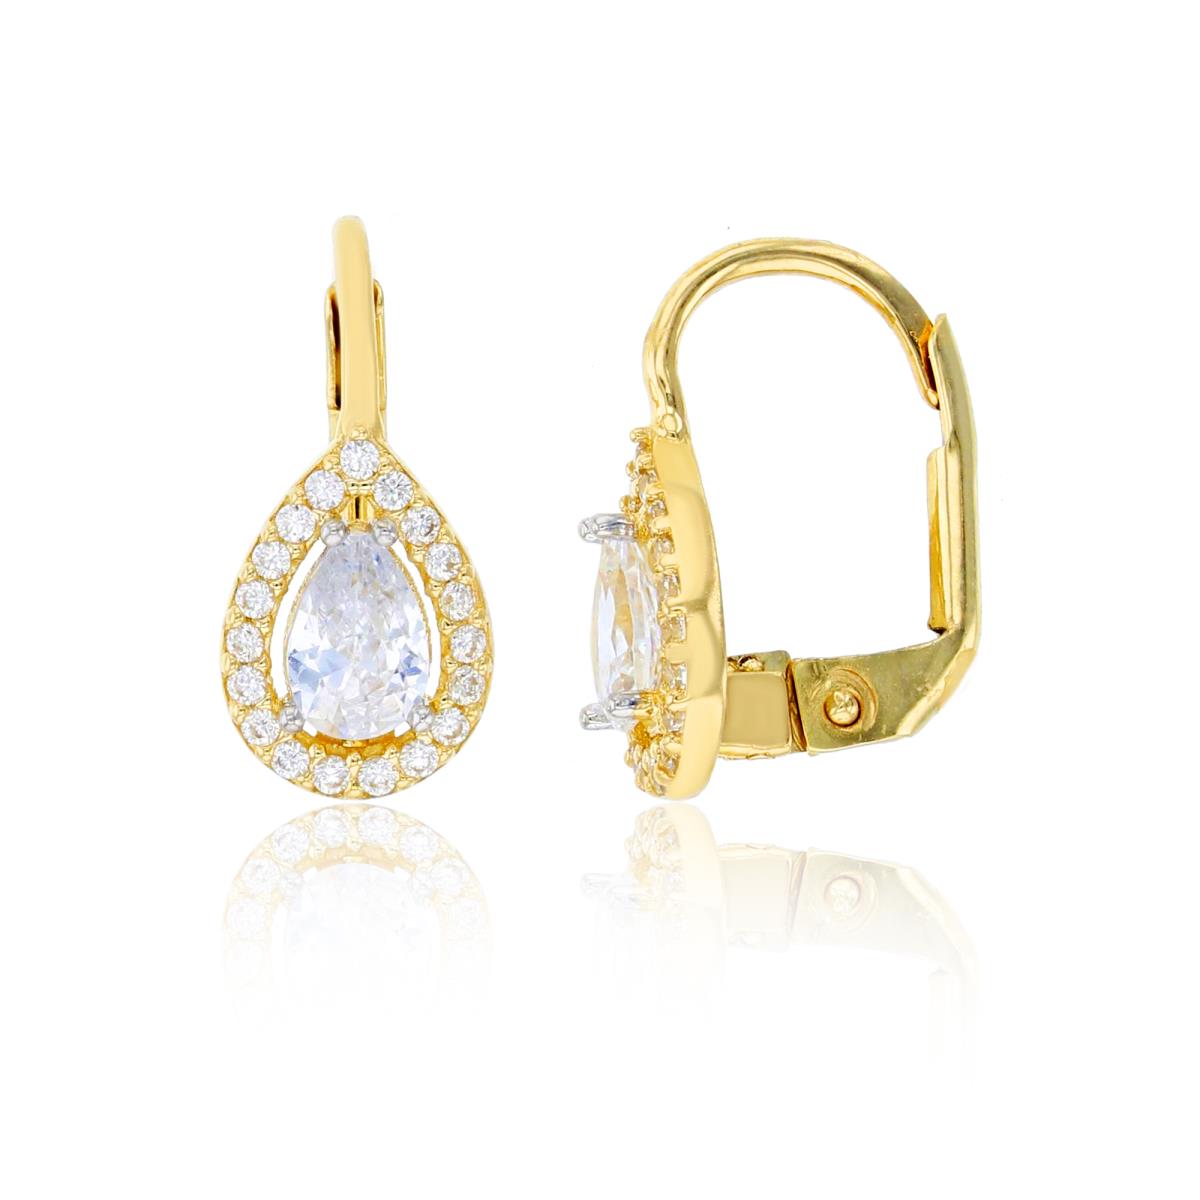 10K Yellow Gold 6x4mm Pear Cut CZ Halo Lever-Back Earring